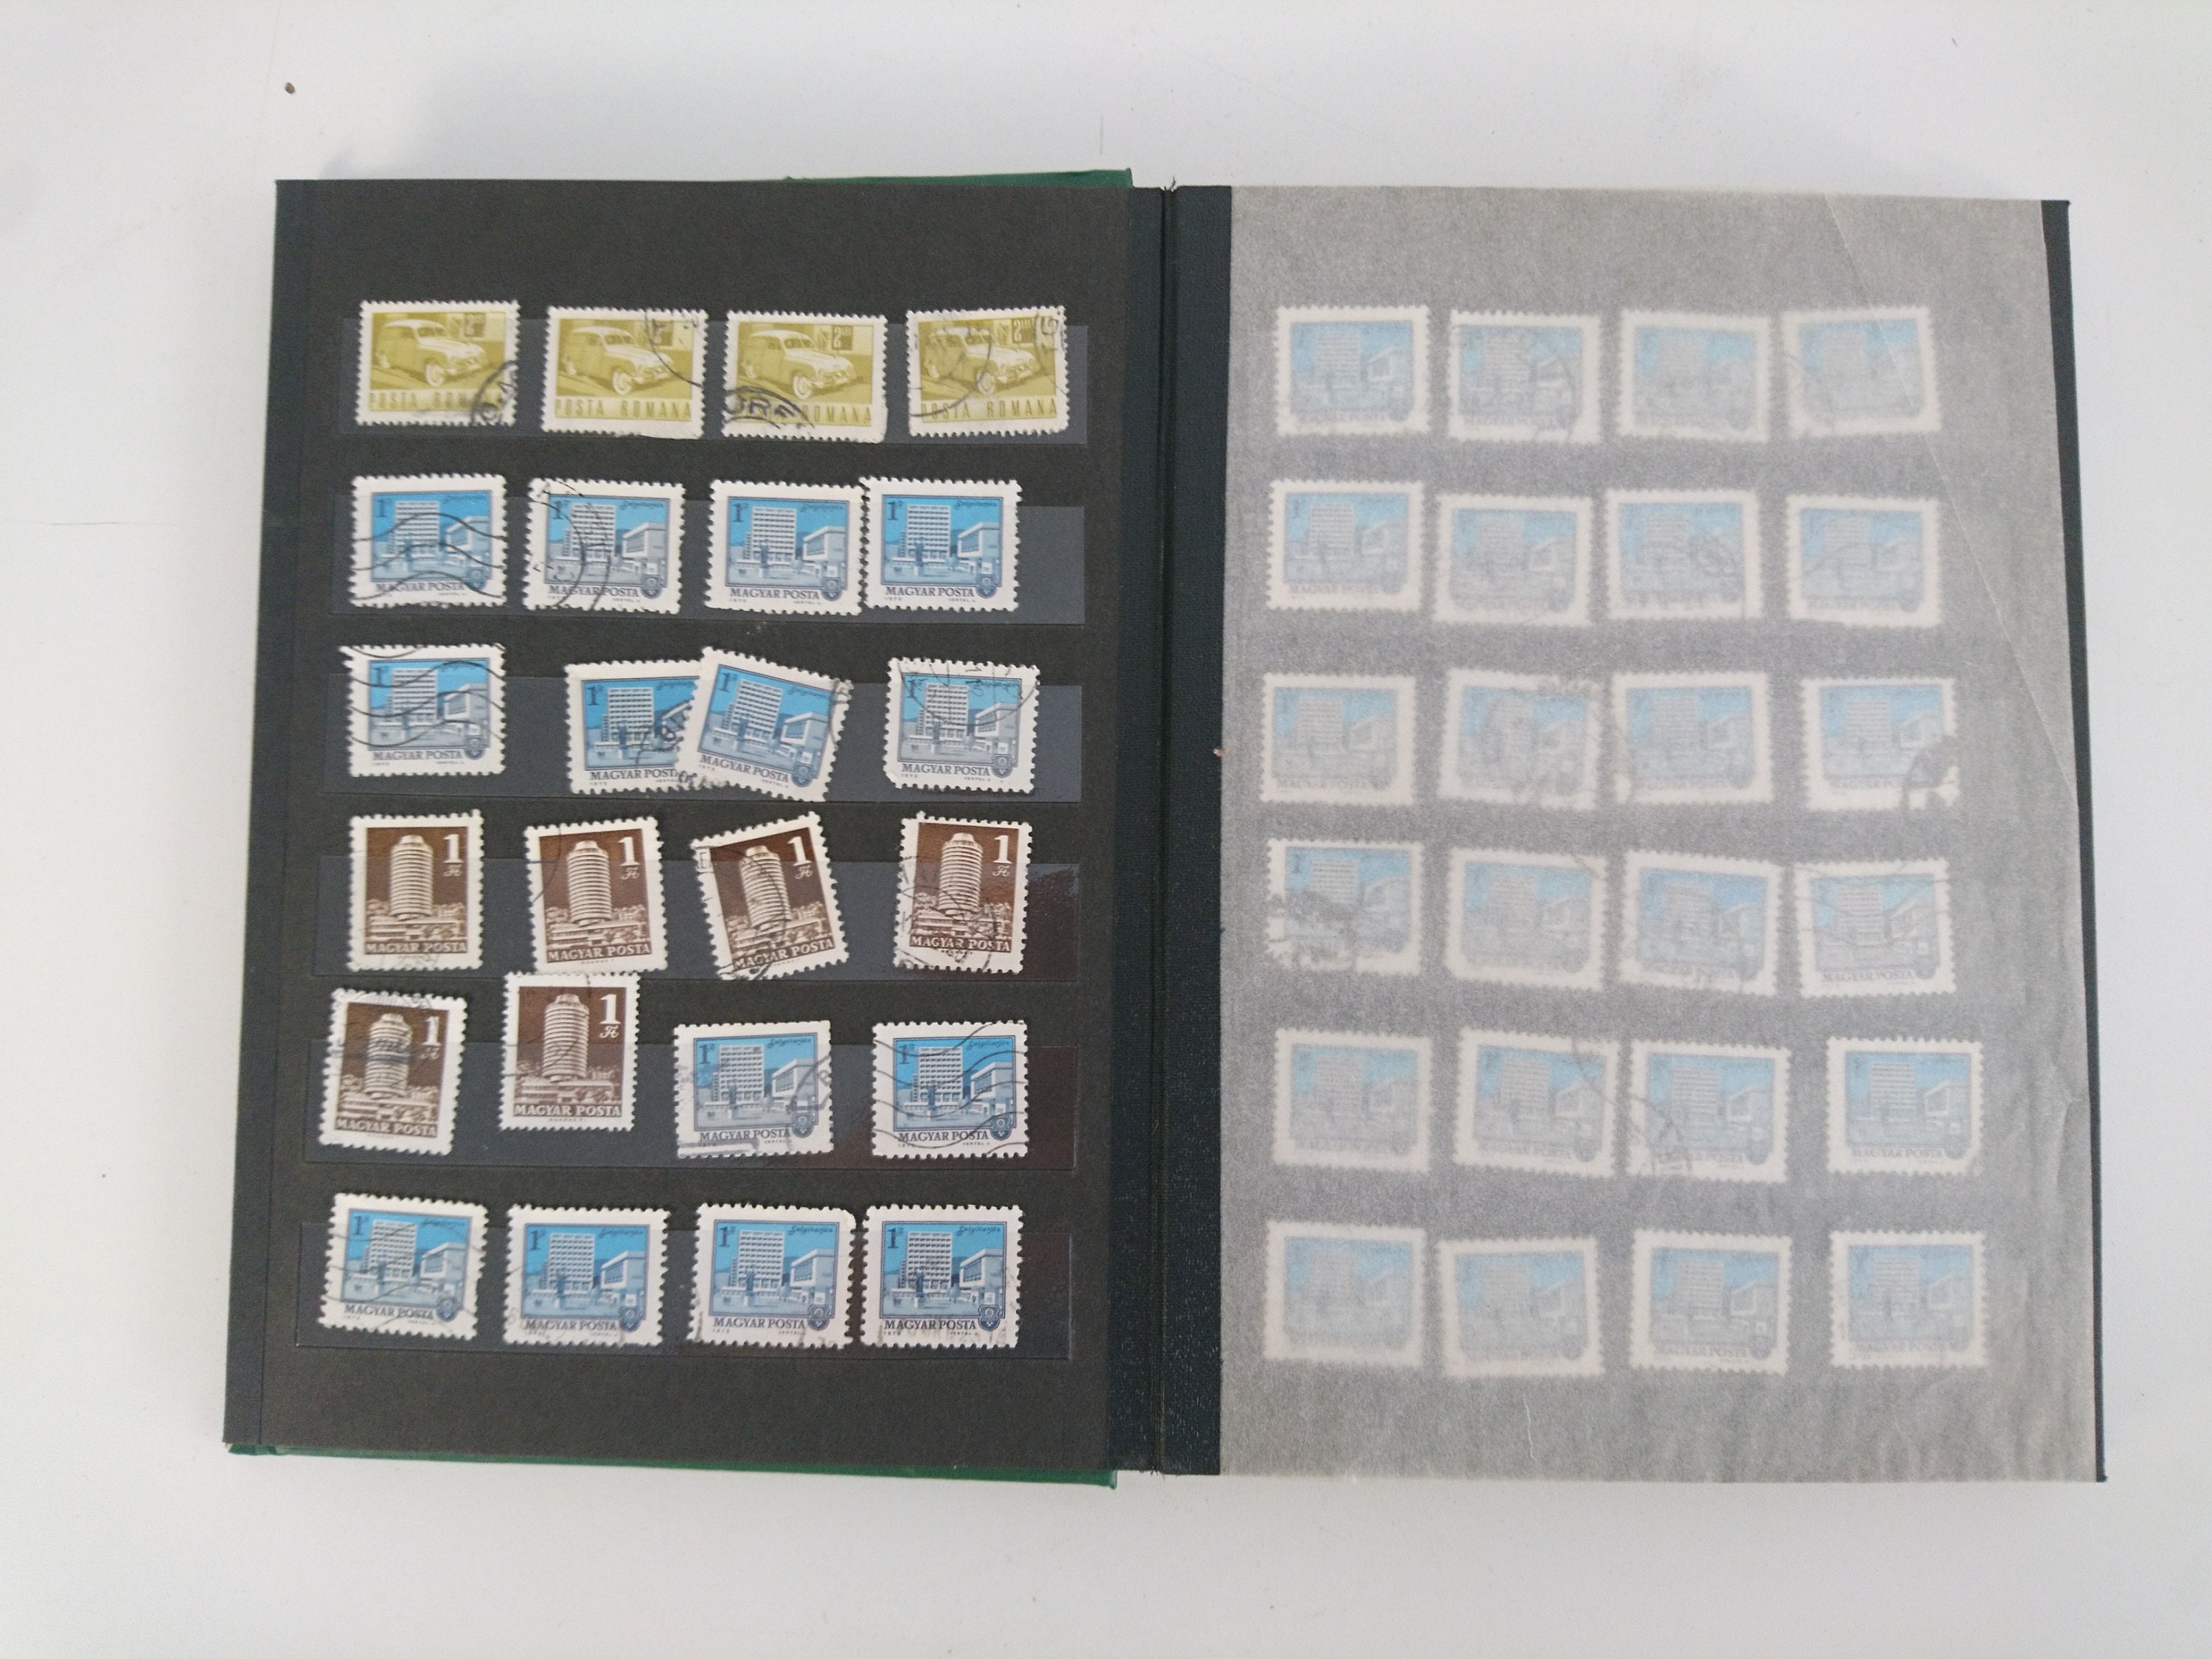 51,970 Stamp Collecting Images, Stock Photos, 3D objects, & Vectors